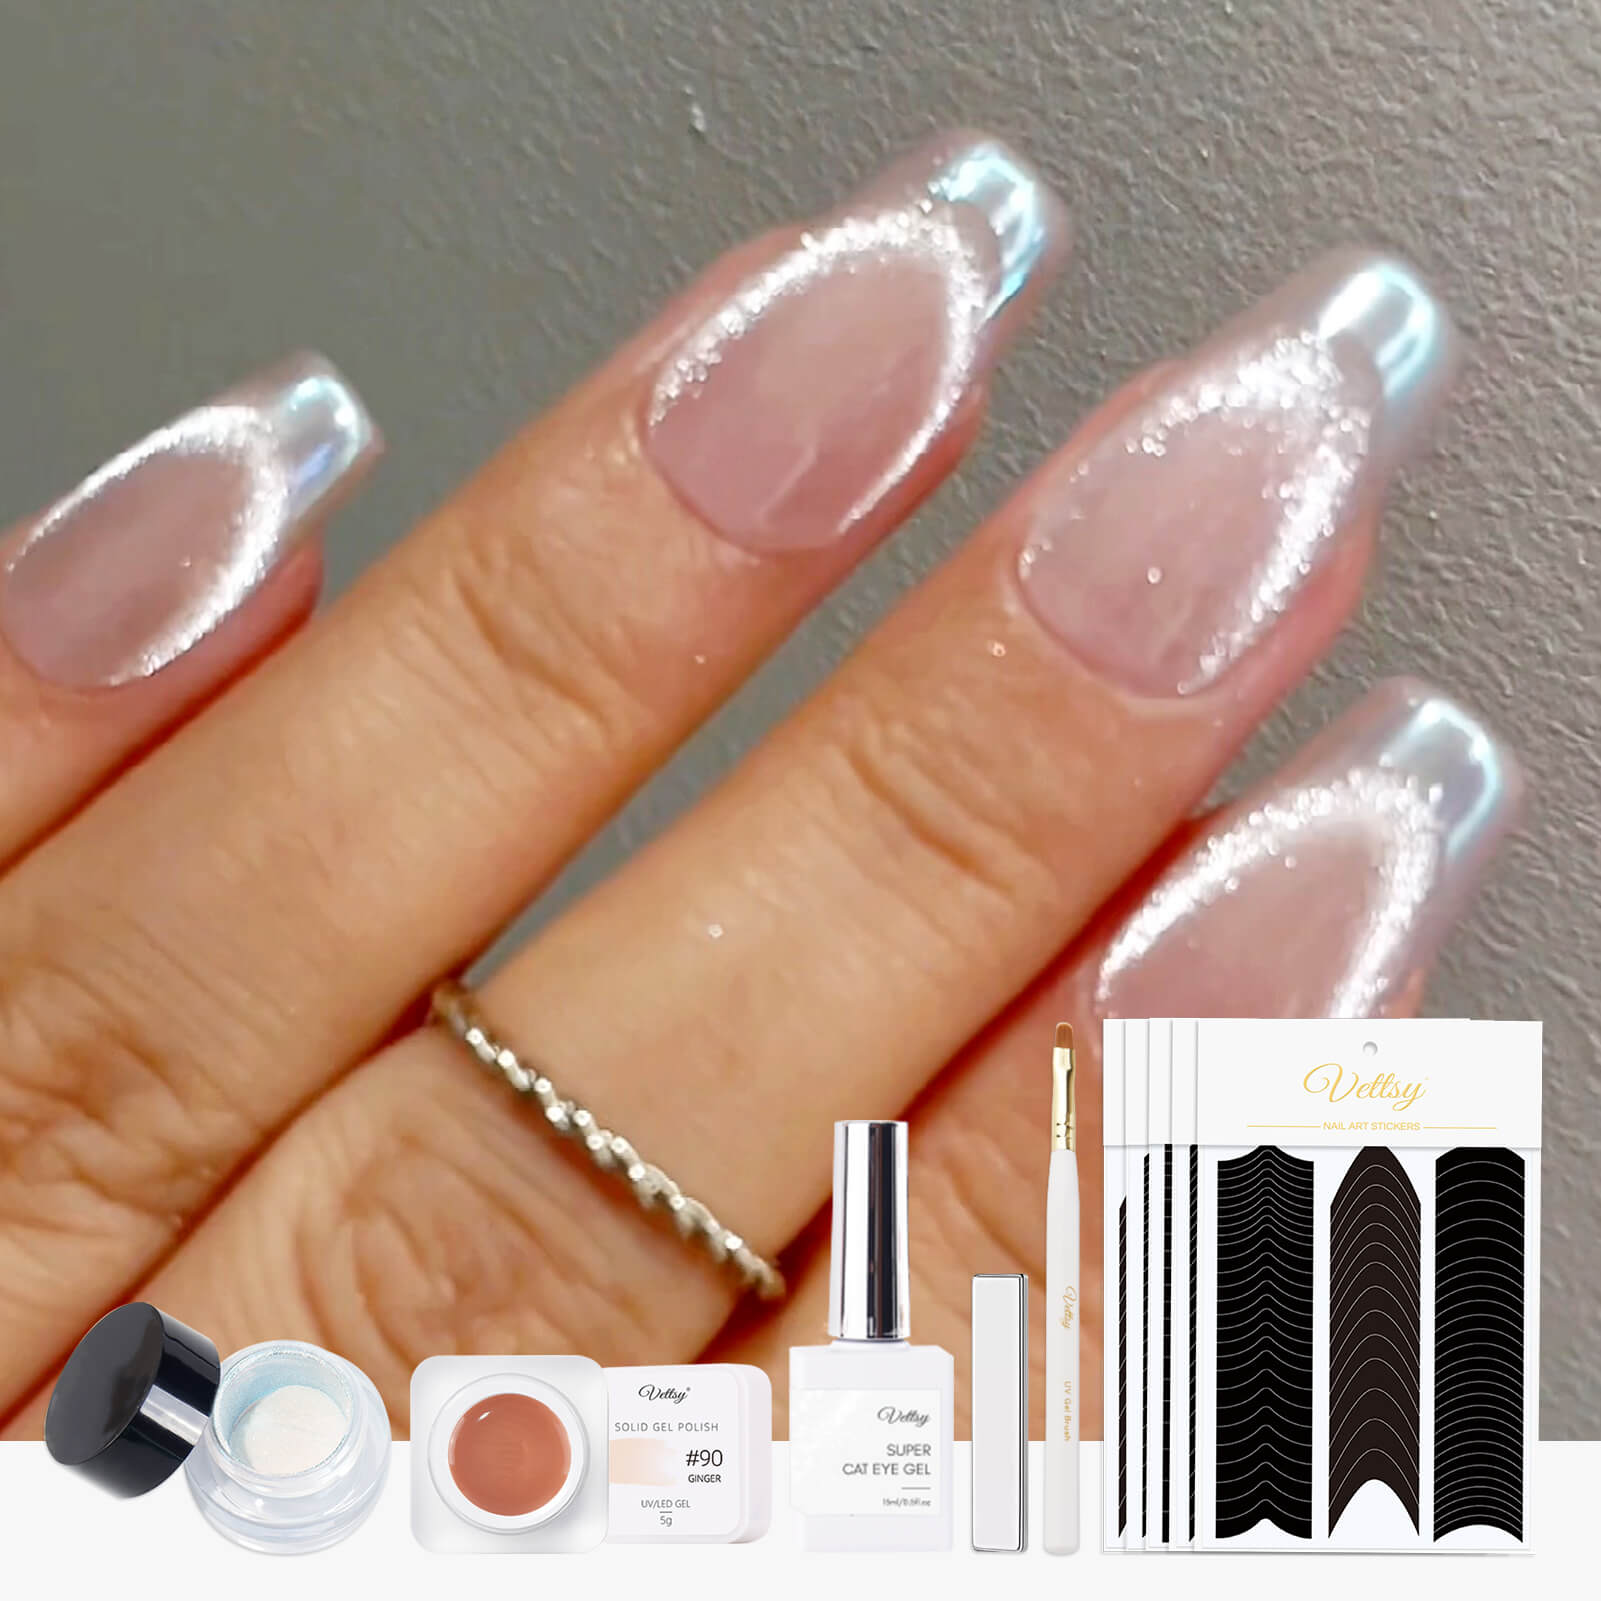 French Gel Manicure with Glitter | Silver glitter french manicure in bio  sculpture | Gel french manicure, Manicures designs, Manicure colors